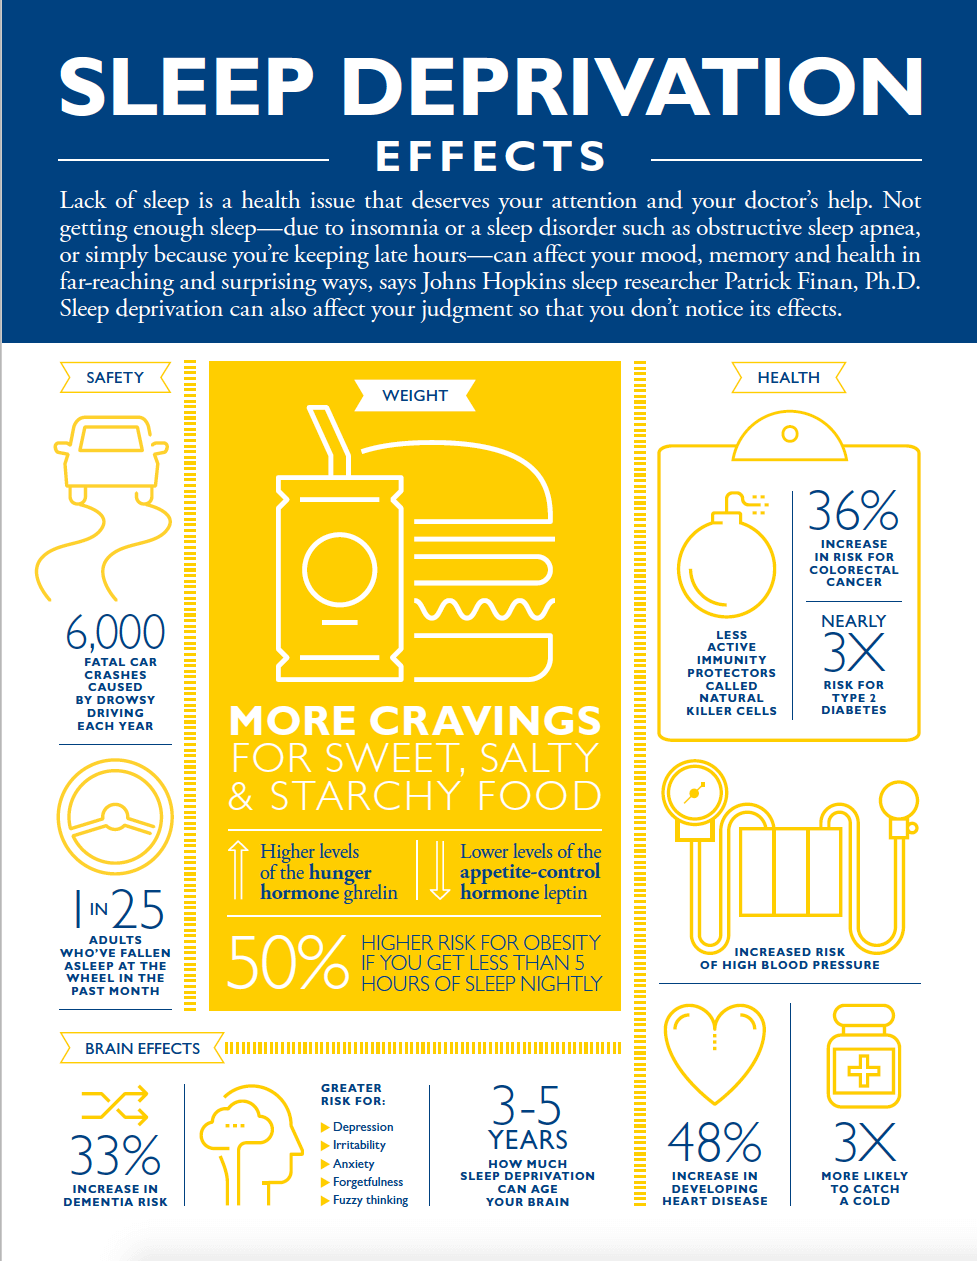 A blue and gold infographic from Johns Hopkins details sleep deprivation’s effects on safety, weight, health, and the brain.